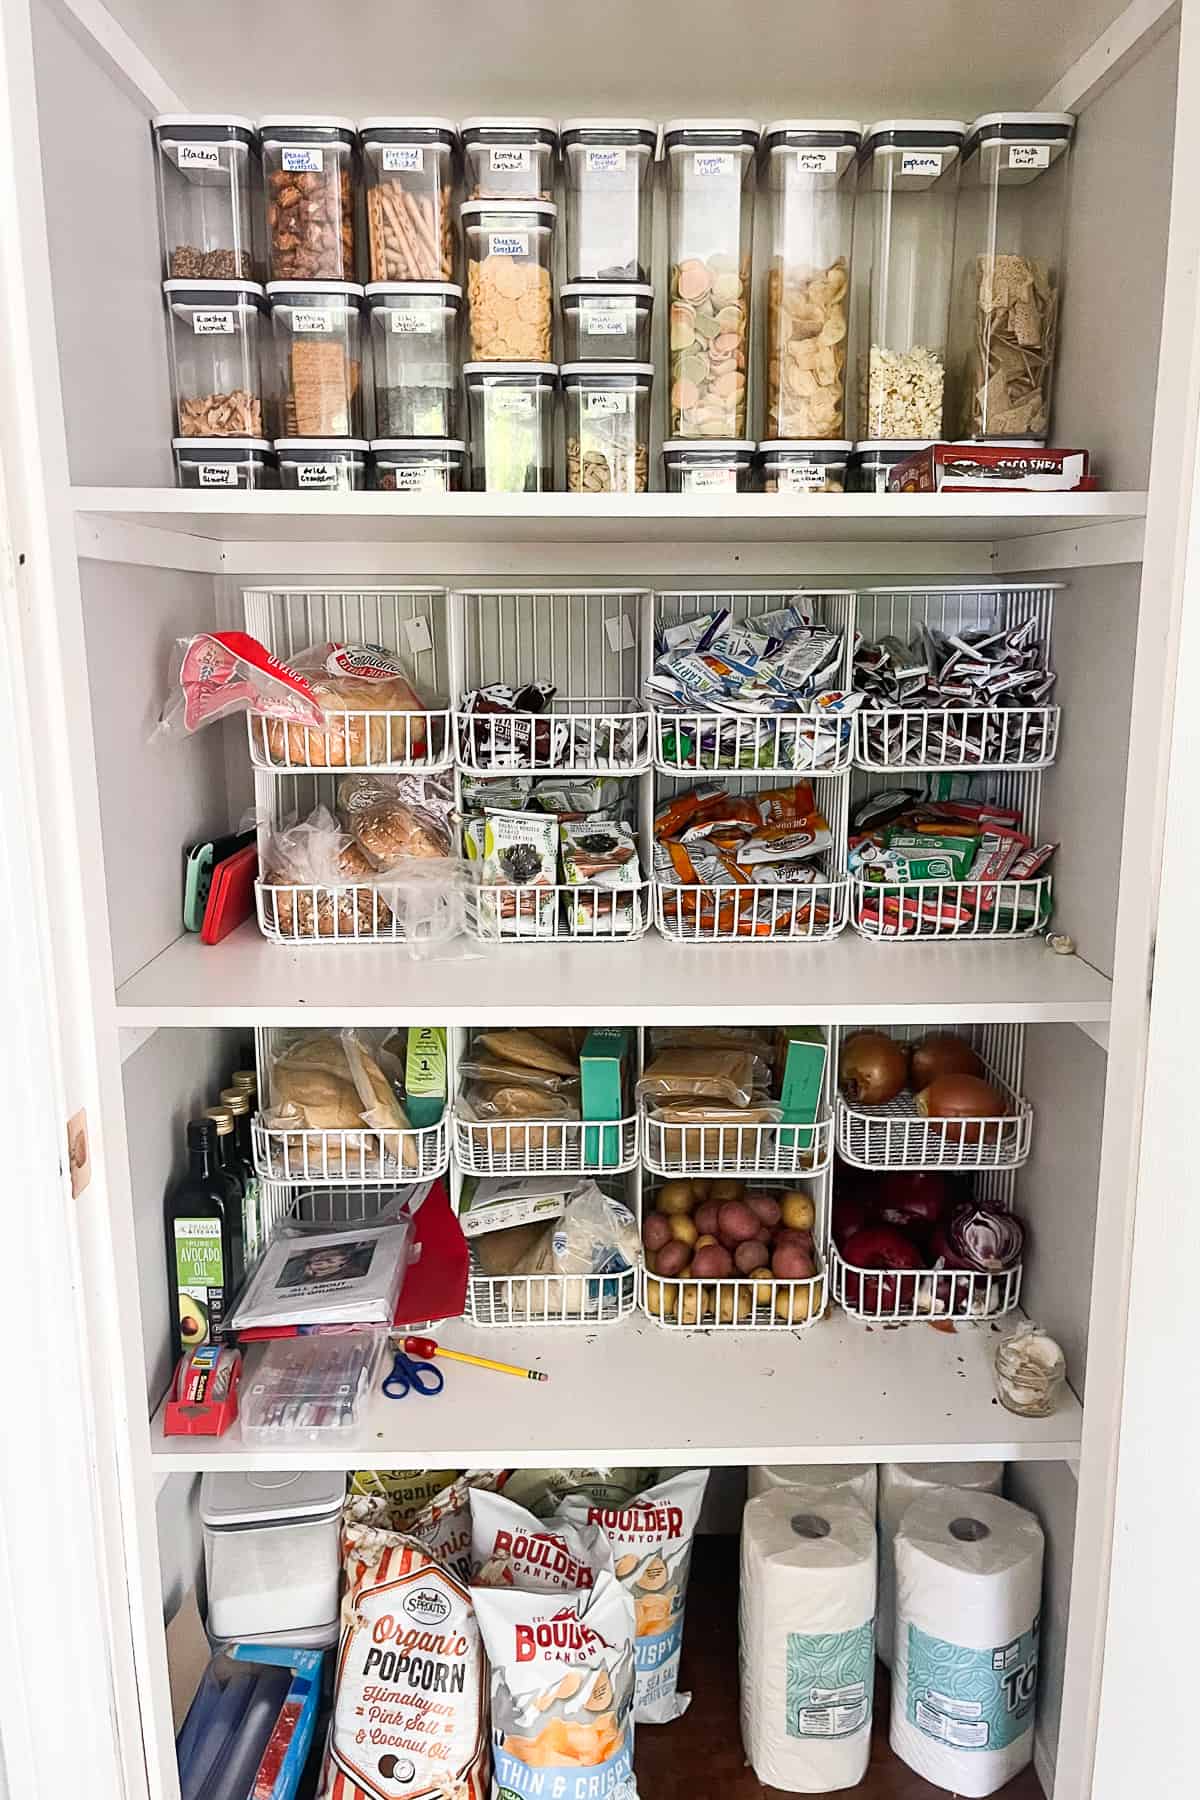 https://www.tasteslovely.com/wp-content/uploads/2022/05/Pantry-Organization-Containers-01.jpg